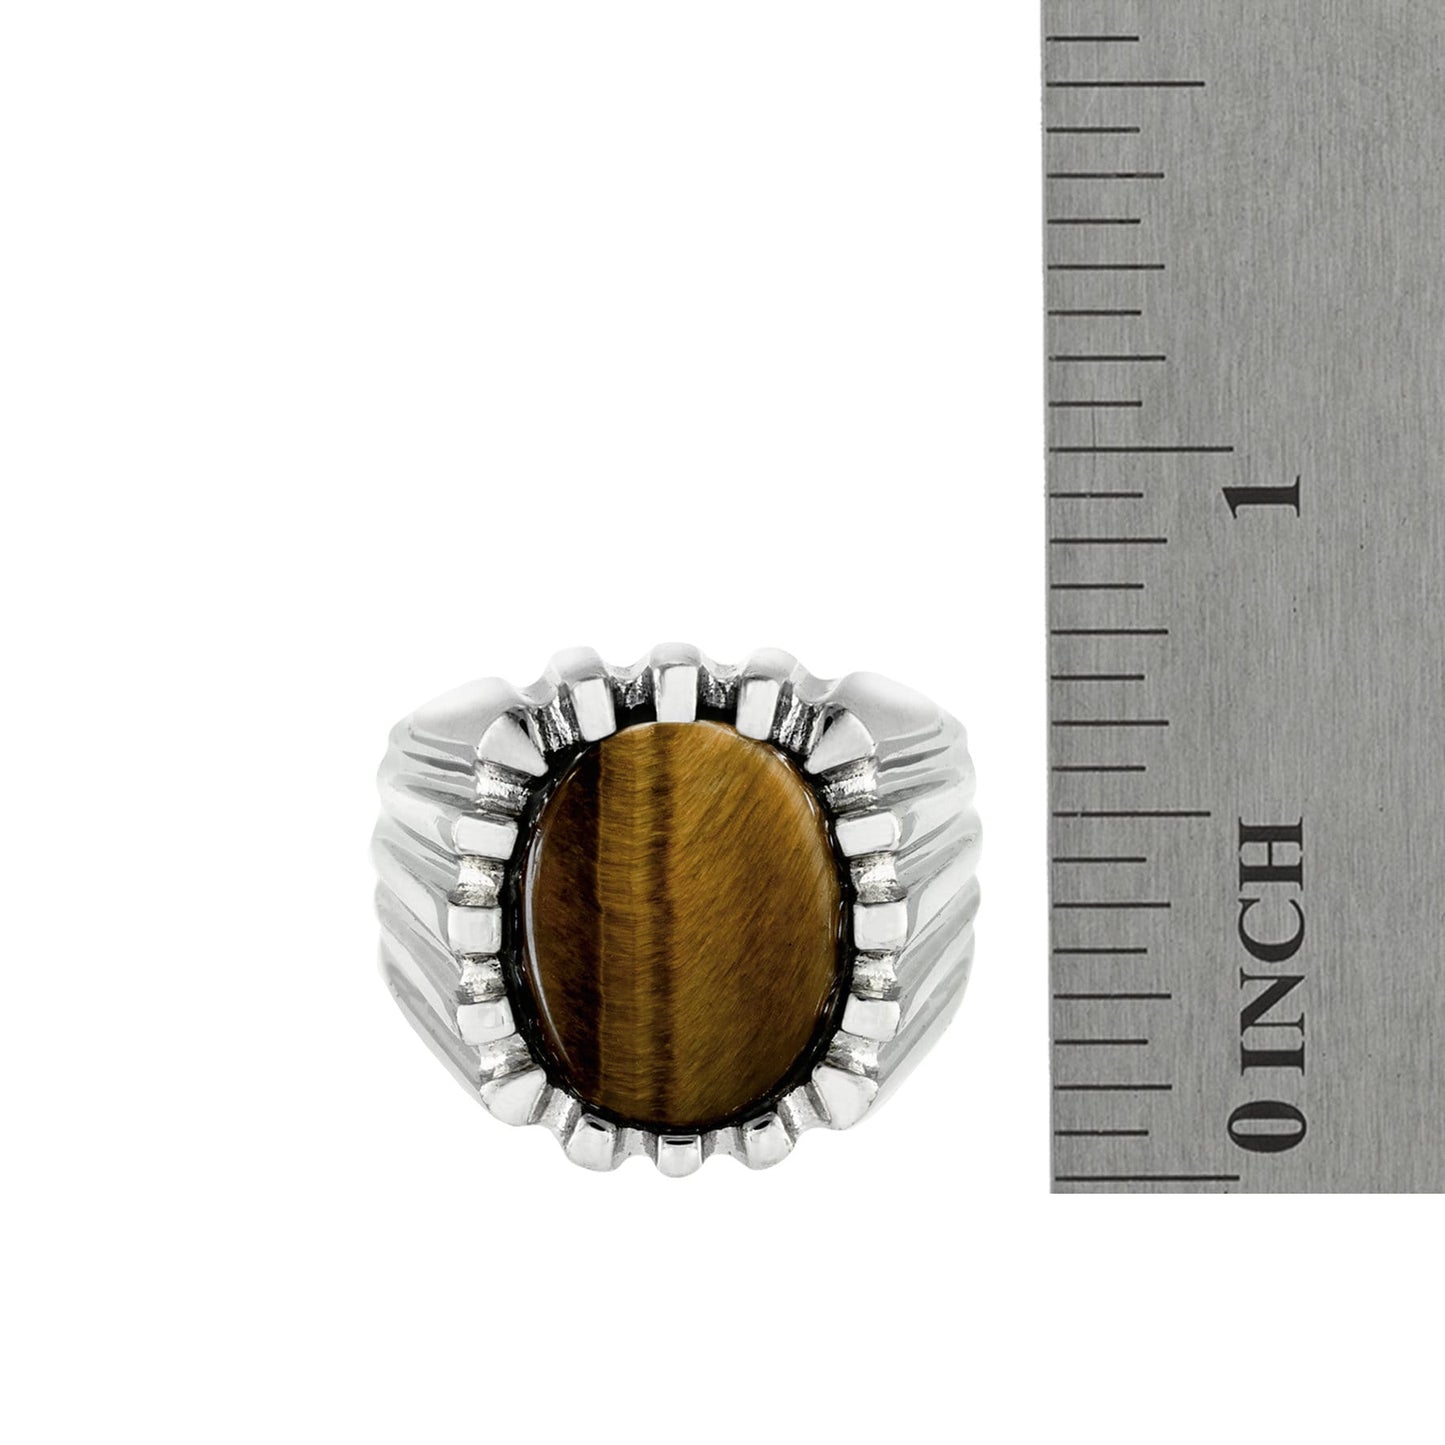 Vintage Ring 1980s Mens Genuine Tiger Eye 18kt White Gold Silver Plated Ring Antique Mens Jewelry #R1960 - Limited Stock - Never Worn